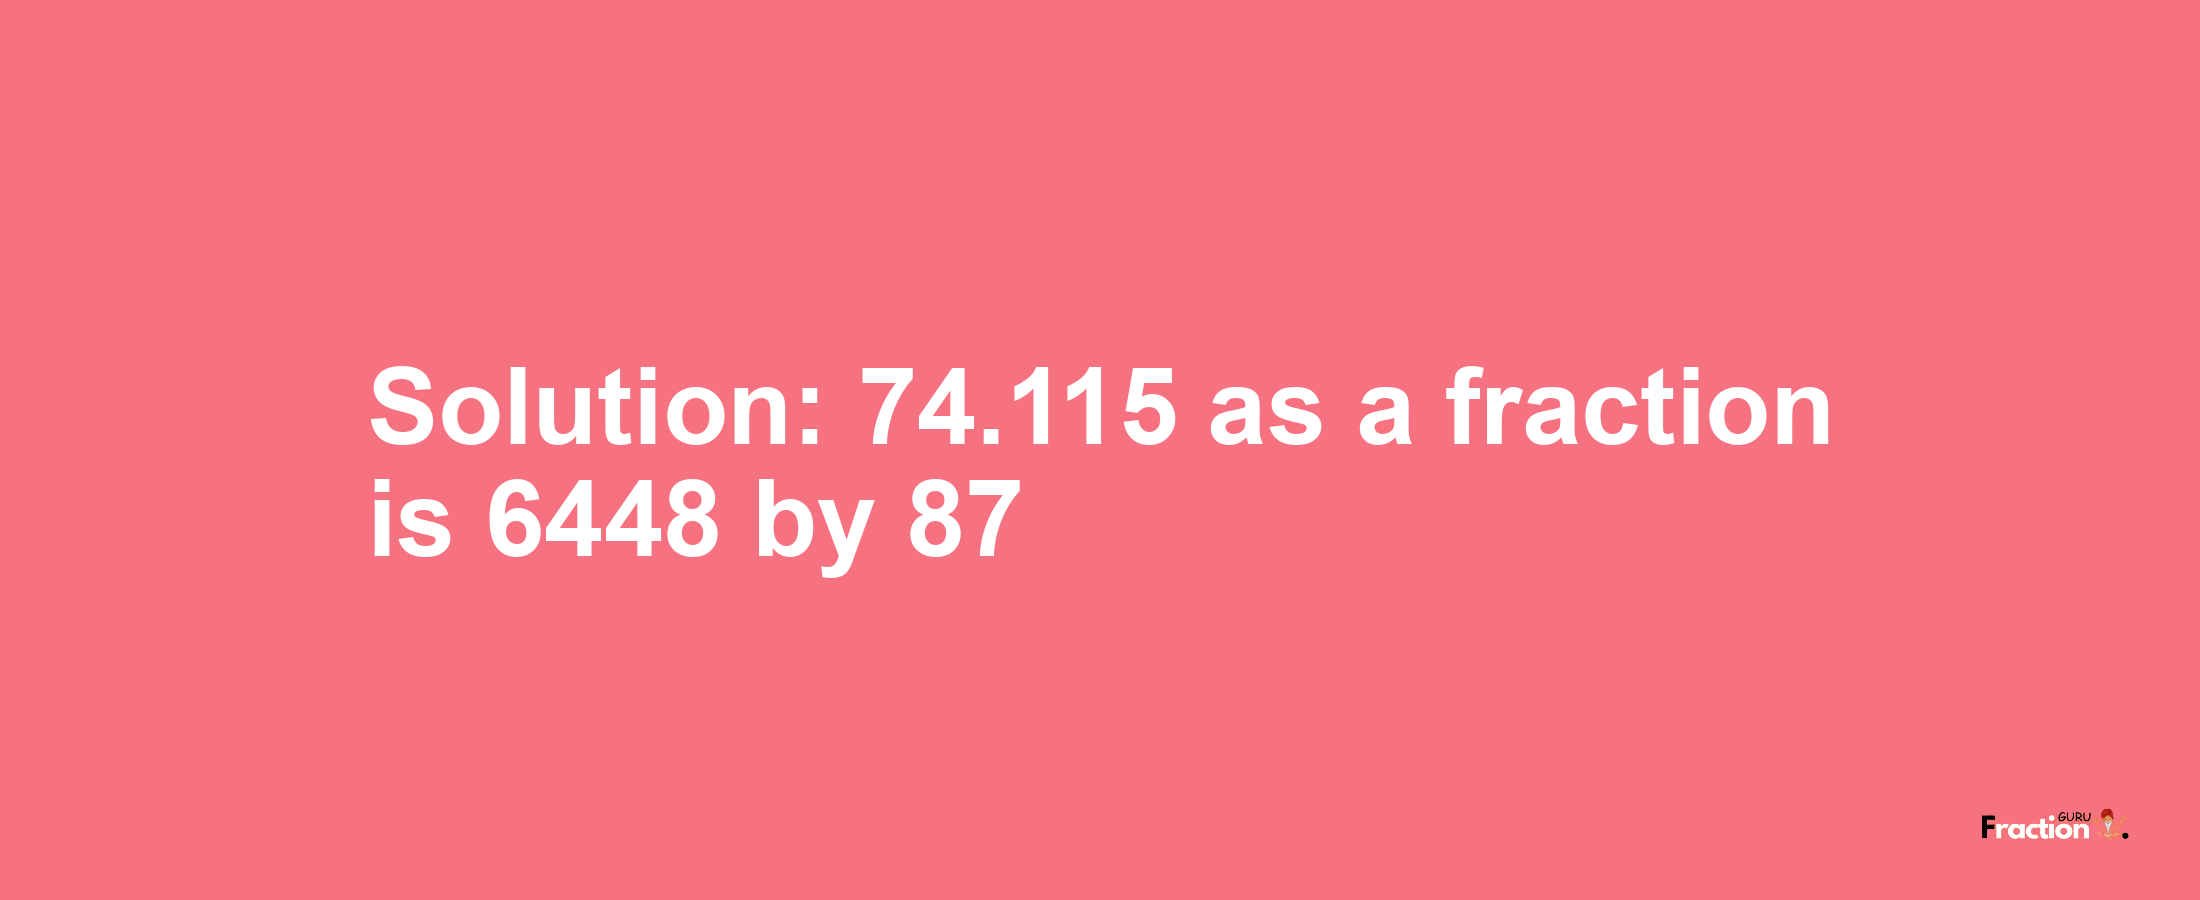 Solution:74.115 as a fraction is 6448/87